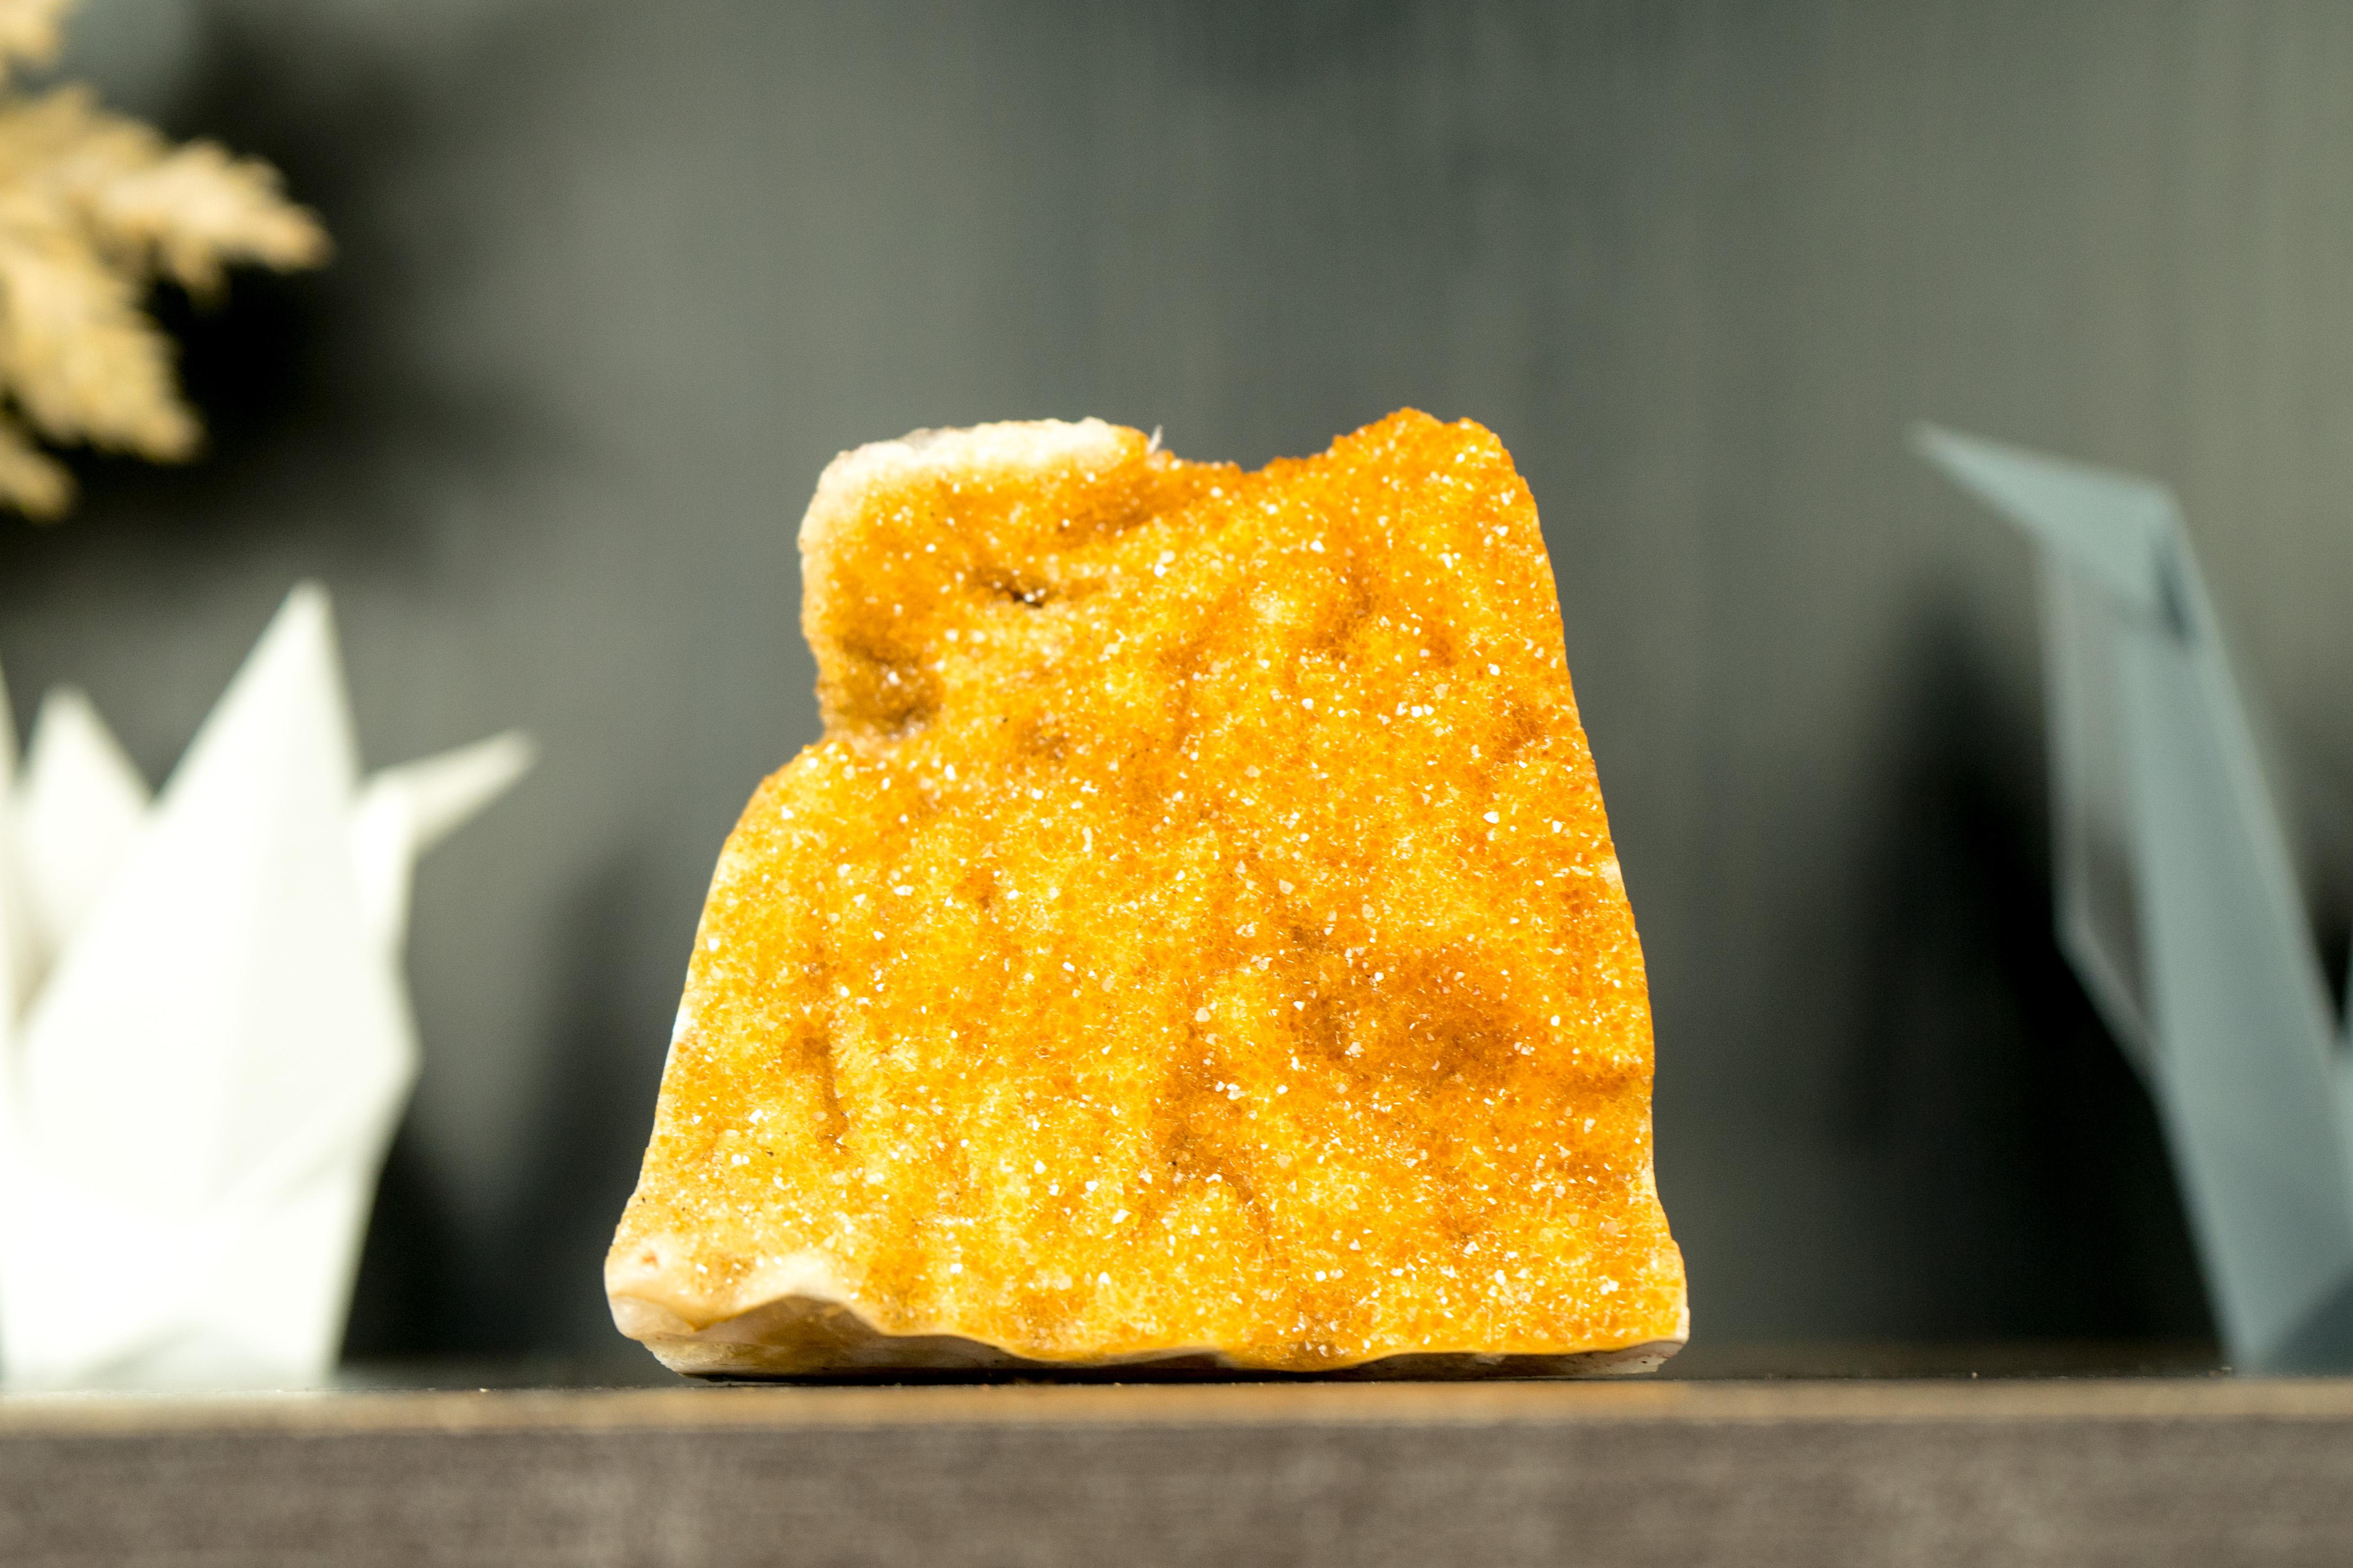 Rare Small Yellow Citrine Cluster with Sparkly Galaxy Druzy

▫️ Description

Though small in size, this magnificent Citrine specimen presents a stunning formation and rarity. Topped with Yellow Galaxy Druzy. Its distinctive combination of features